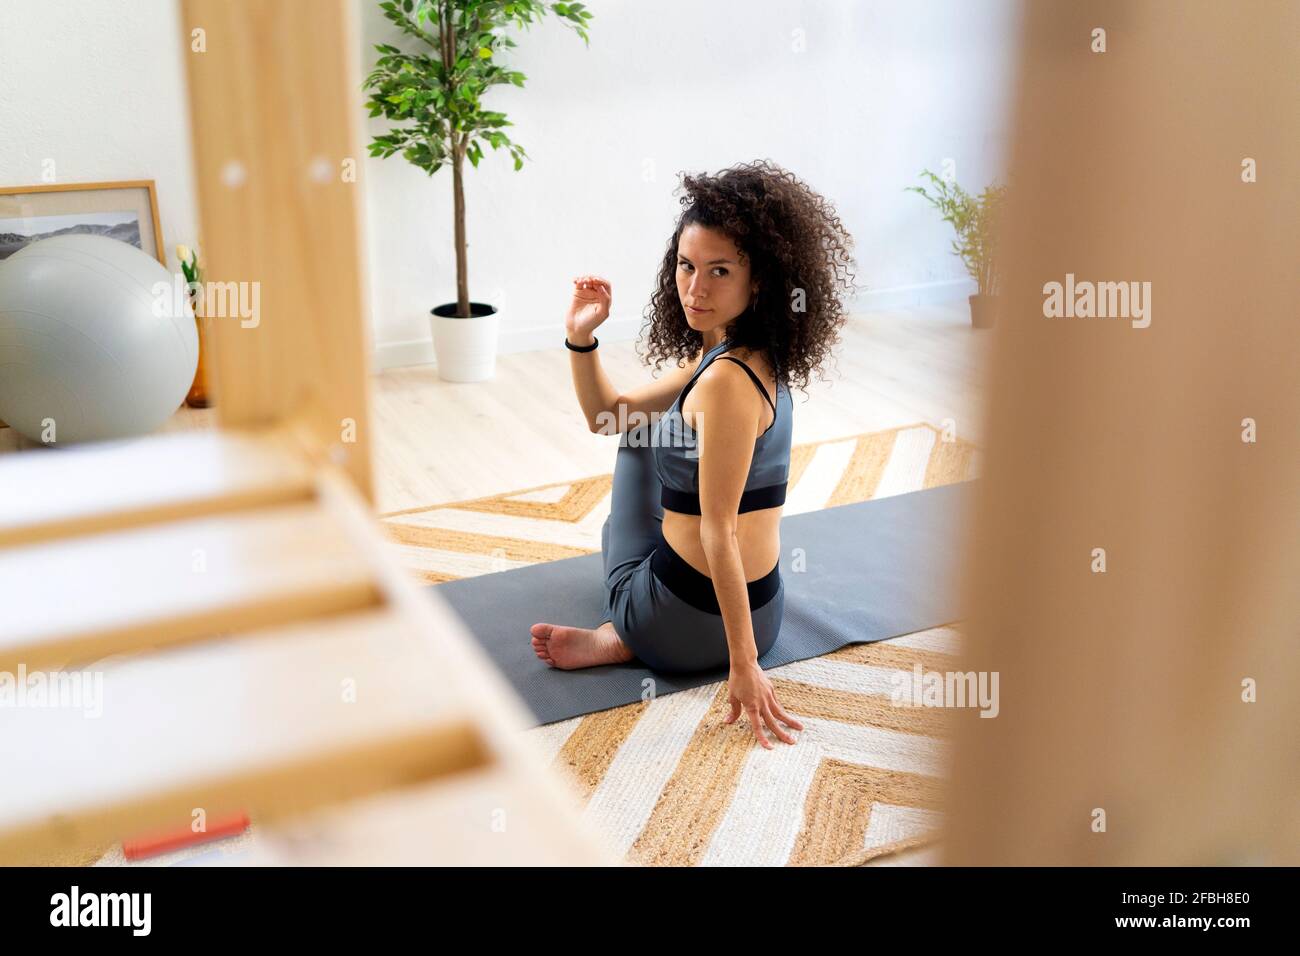 Woman with curly hair doing spinal twist pose at home Stock Photo